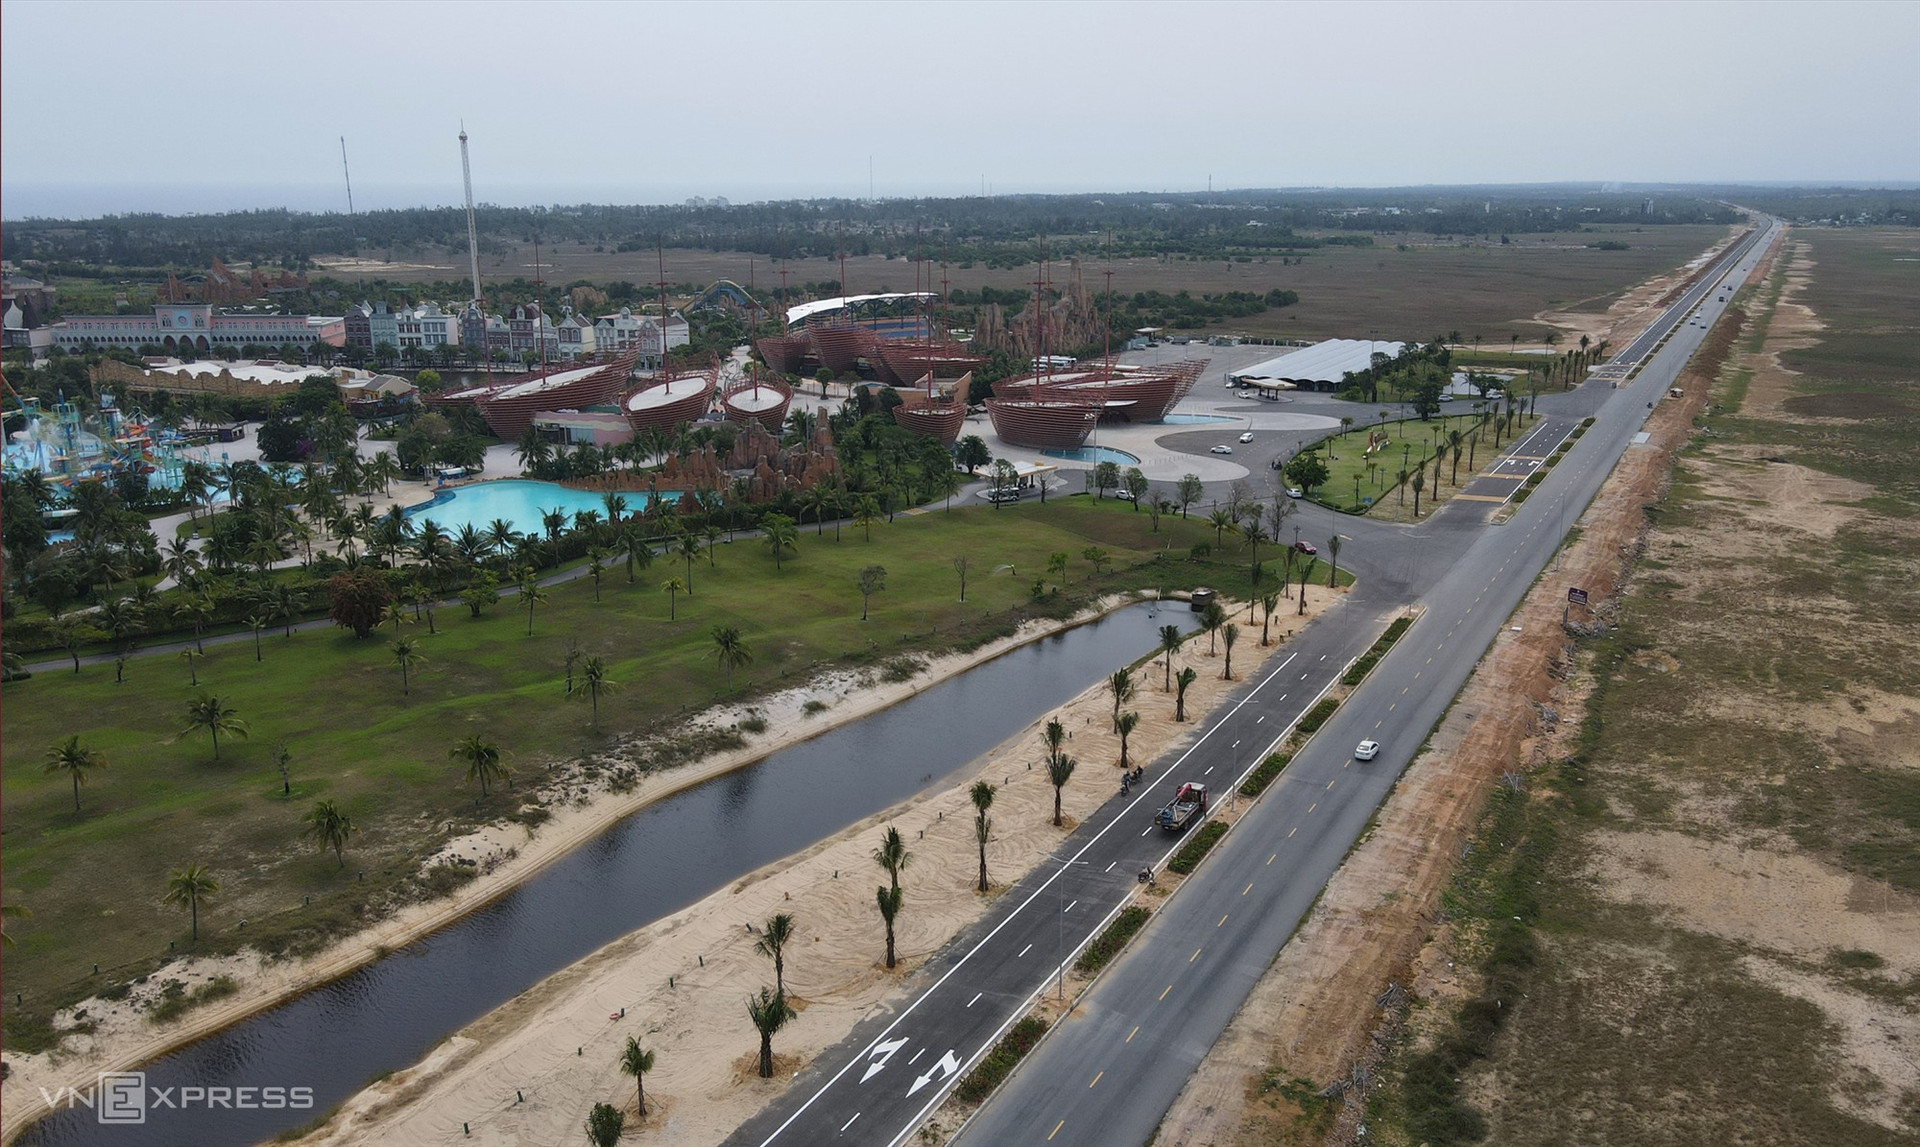 The road goes by a coastal resort and entertainment area in Thang Binh district. It helps attract more tourism projects.